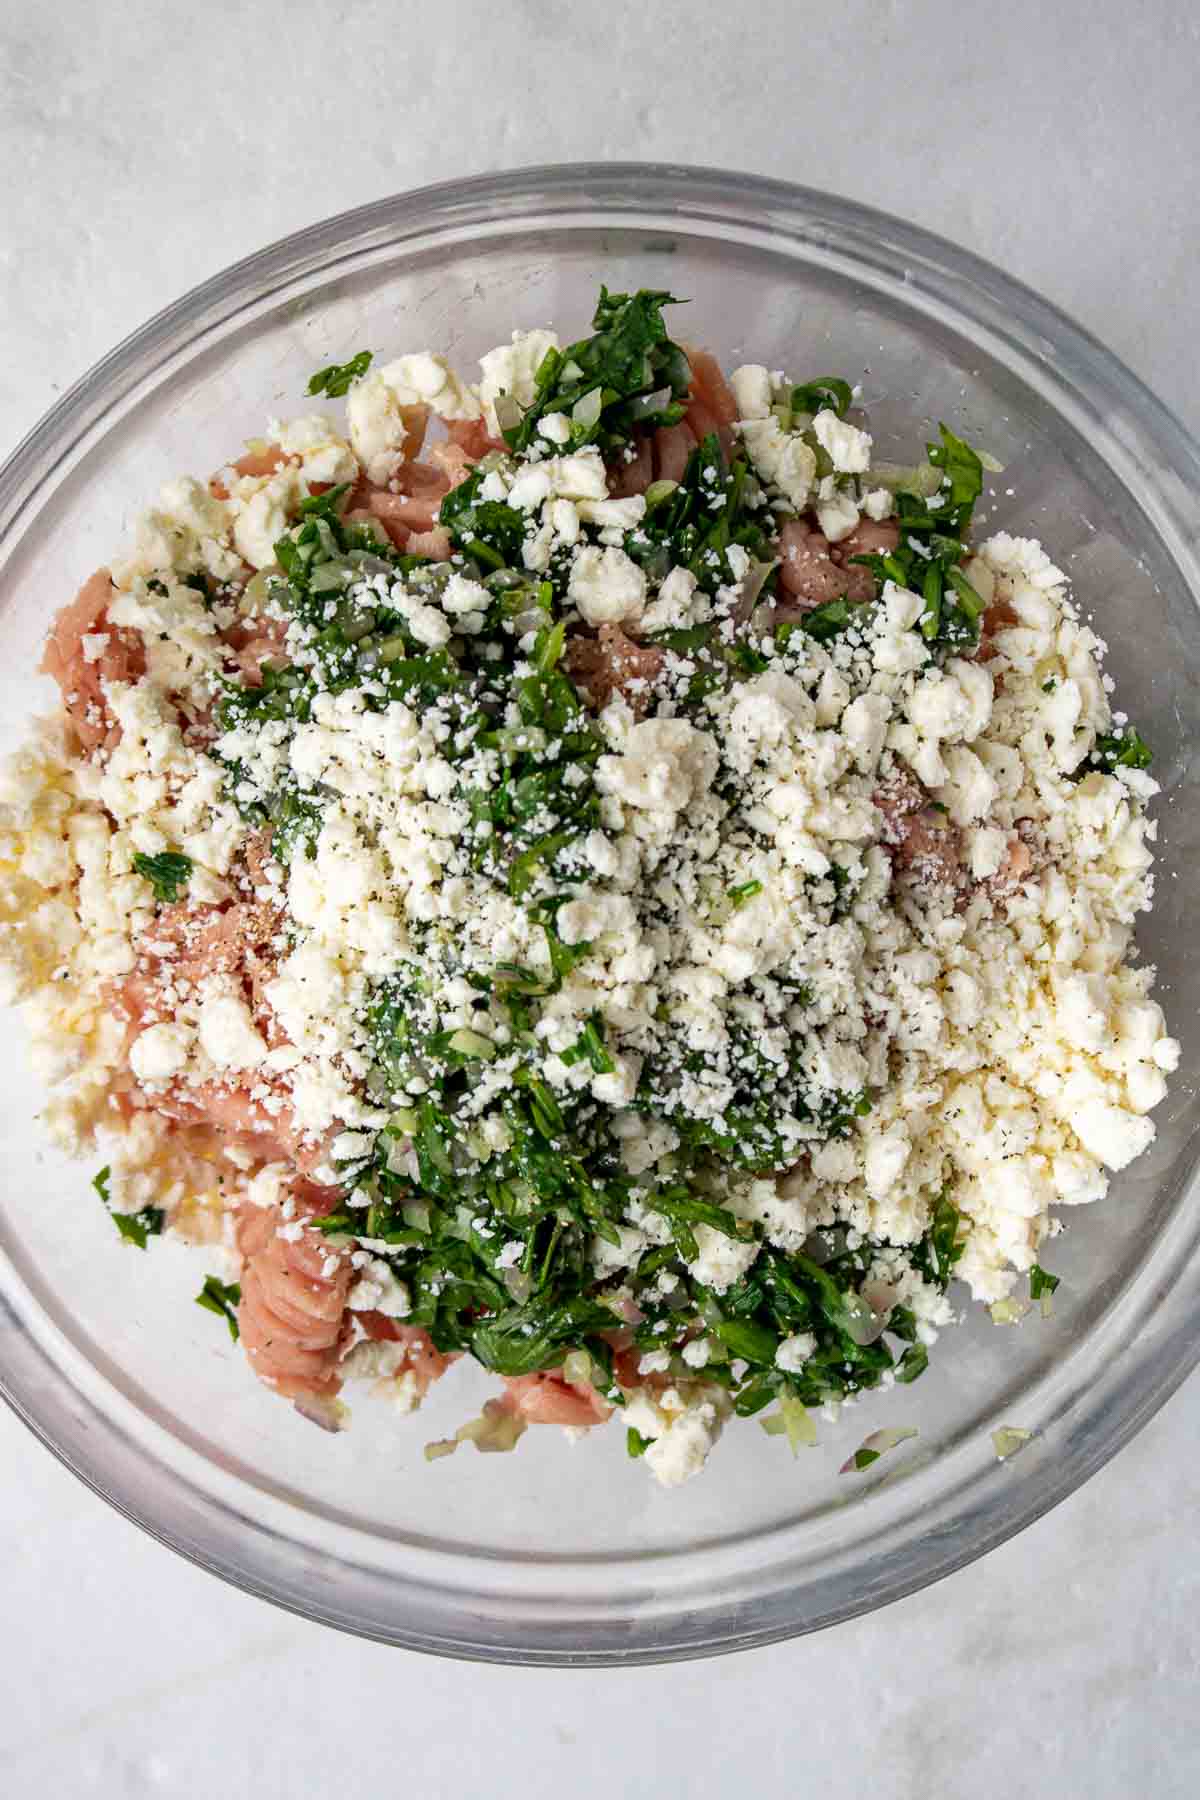 Ingredients for turkey burgers in a bowl; onion, garlic, ground turkey, cooked spinach, crumbled feta cheese, salt, and black pepper.